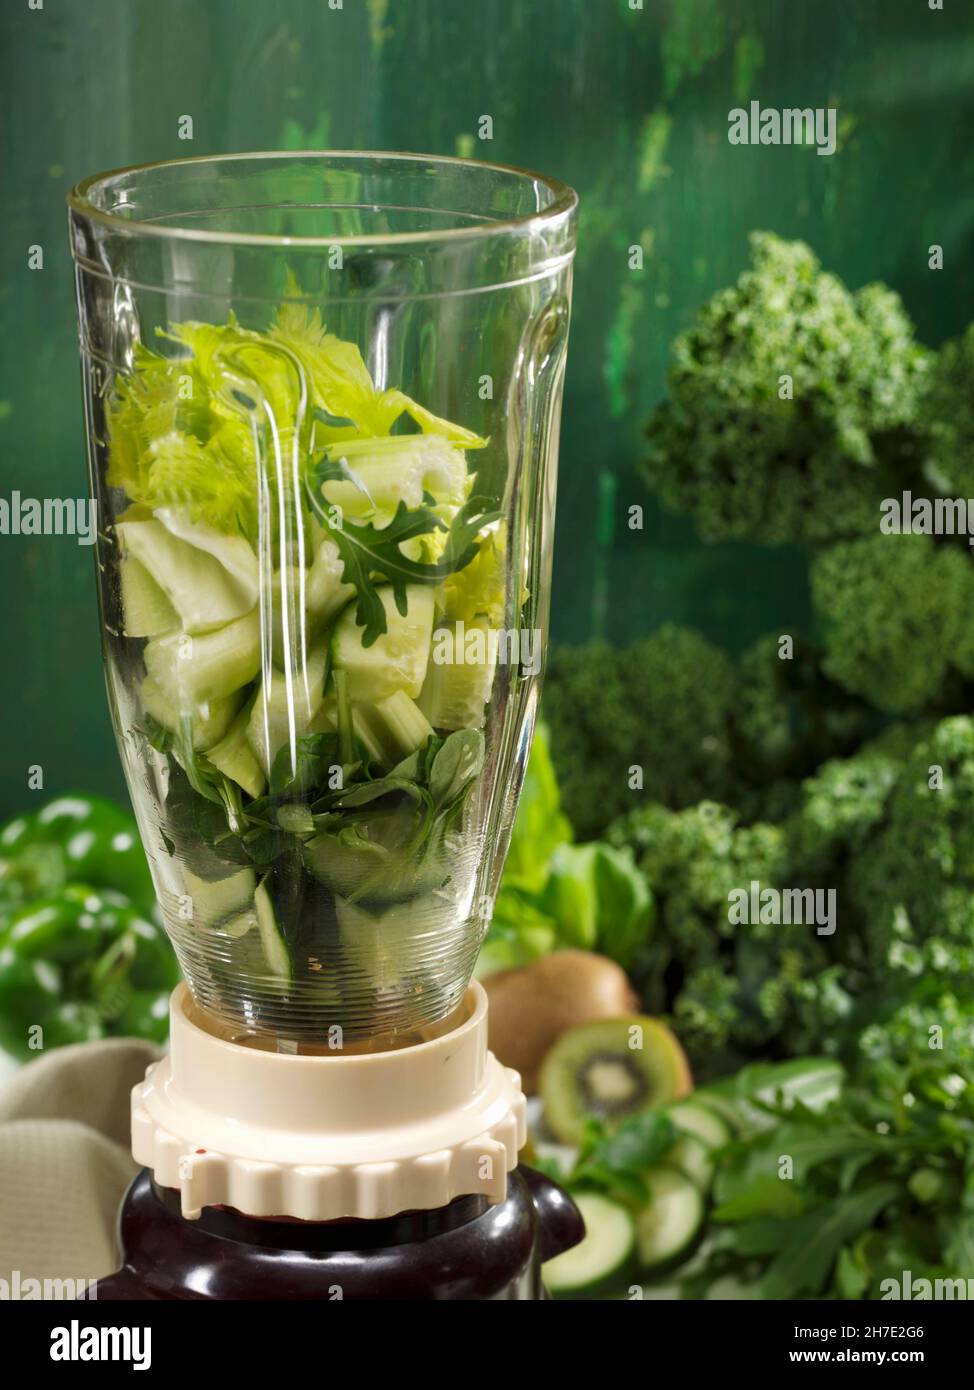 Ingredients for green smoothies in a mixer Stock Photo